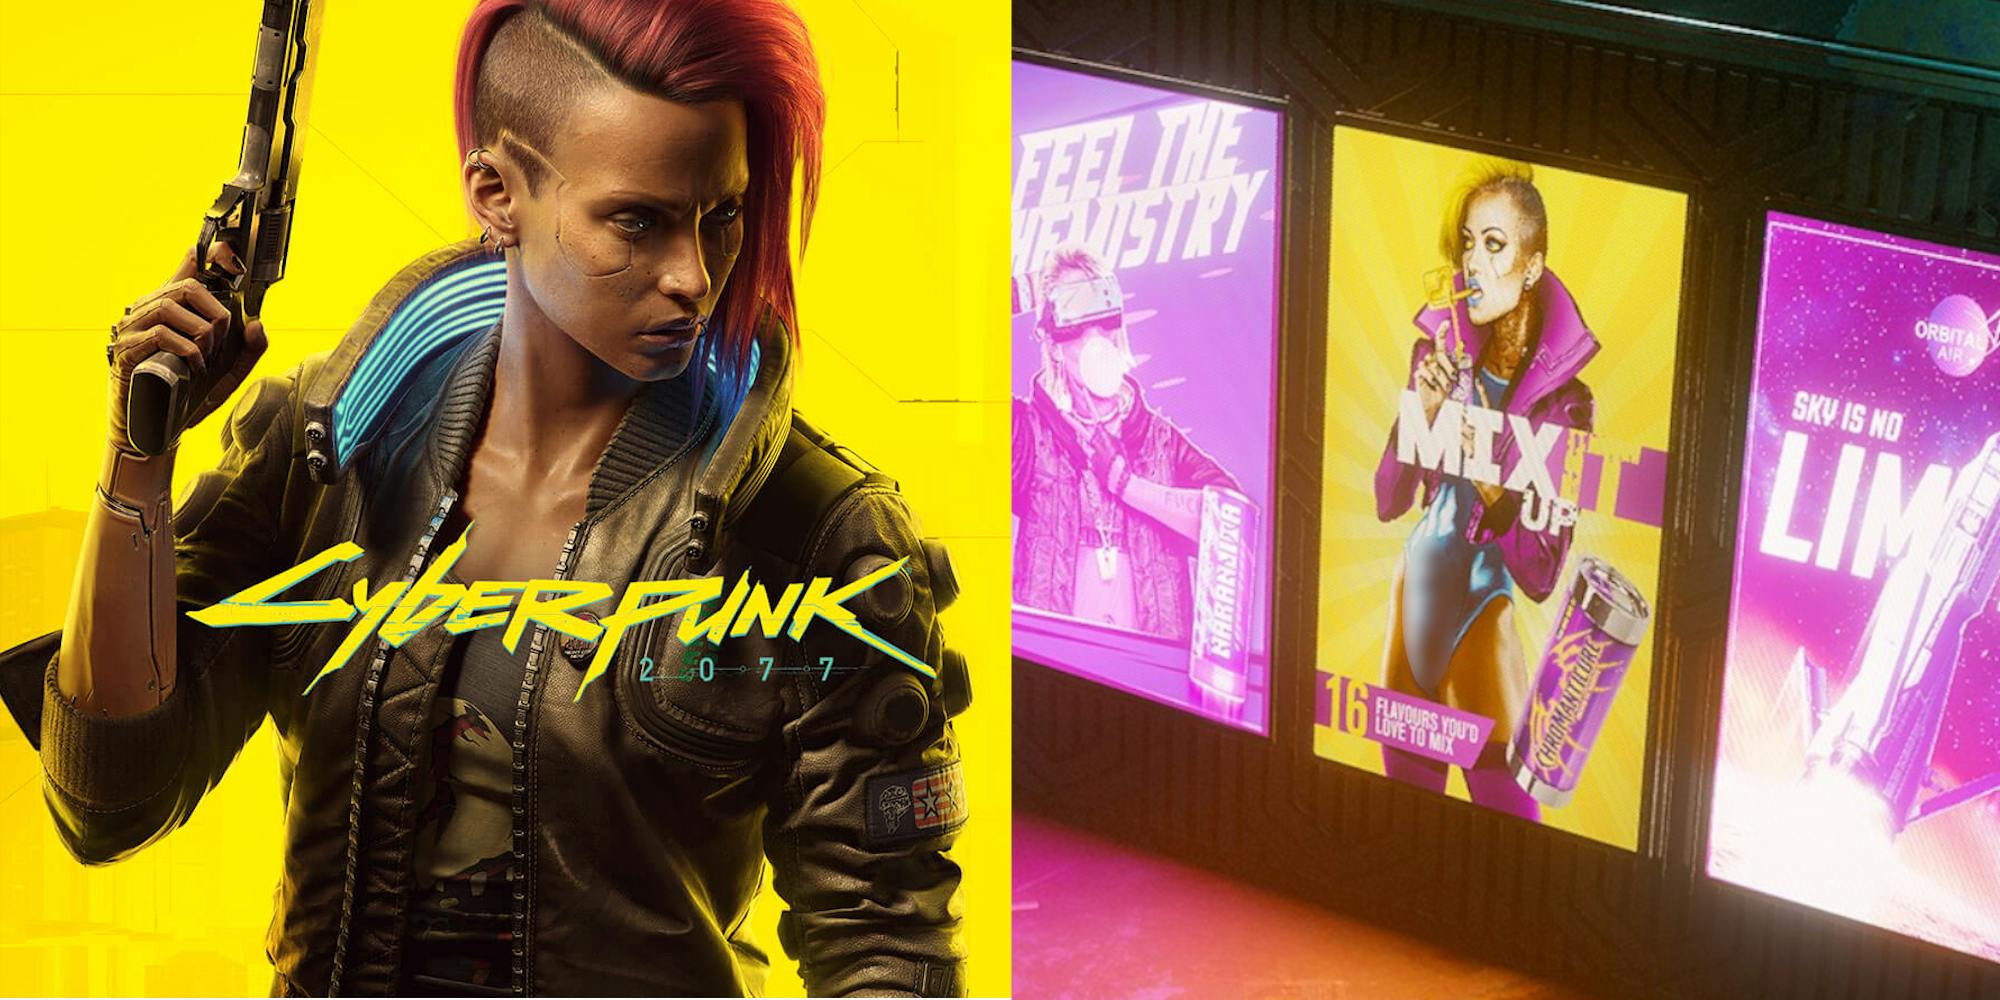 A side-by-side comparison of the Cyberpunk 2077 cover and the controversial "Chromanticore" in-game trans model.